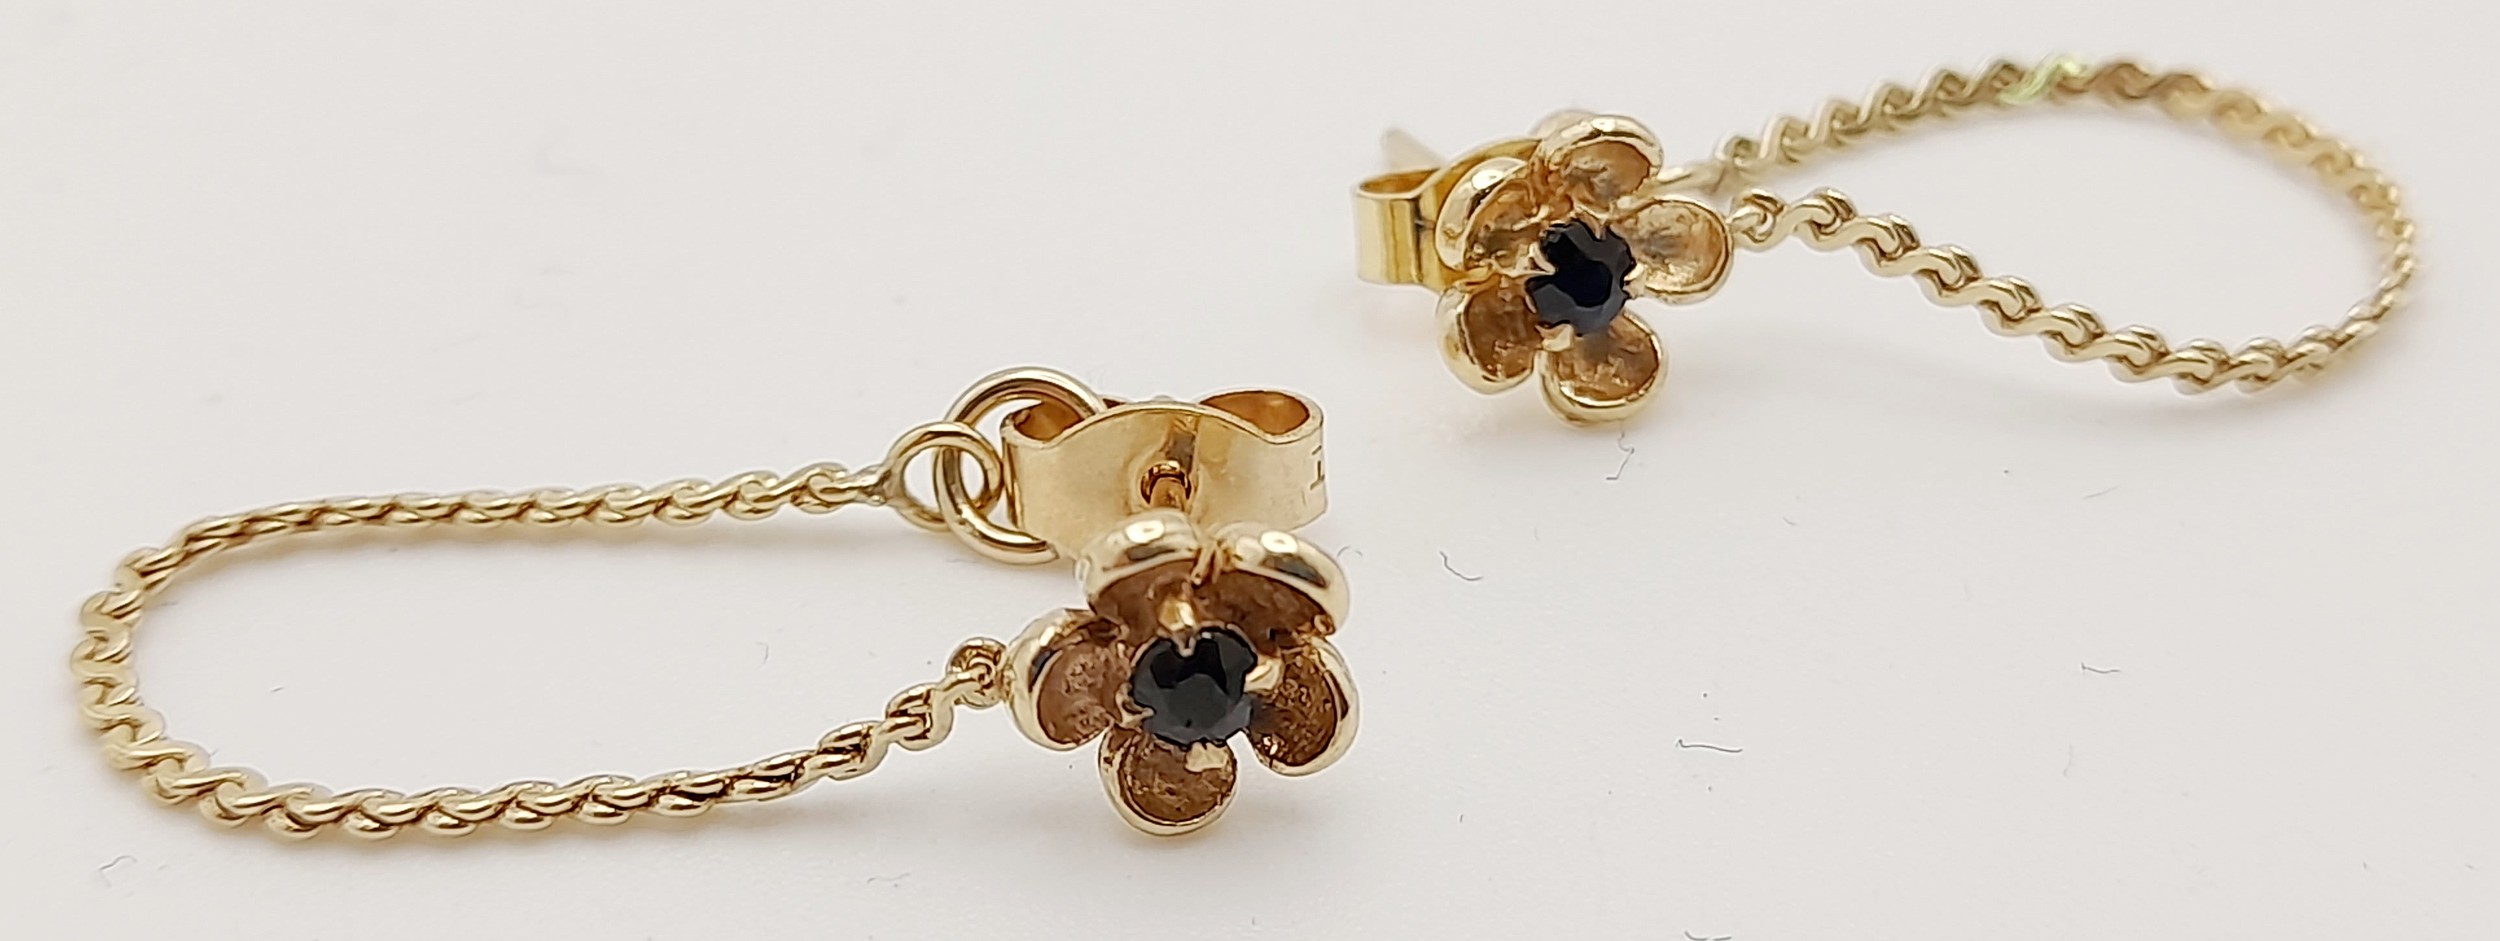 A Pair of 9K Gold Sapphire Set Earrings - with snake drop chain. 1.65g weight. Ref: 619441M